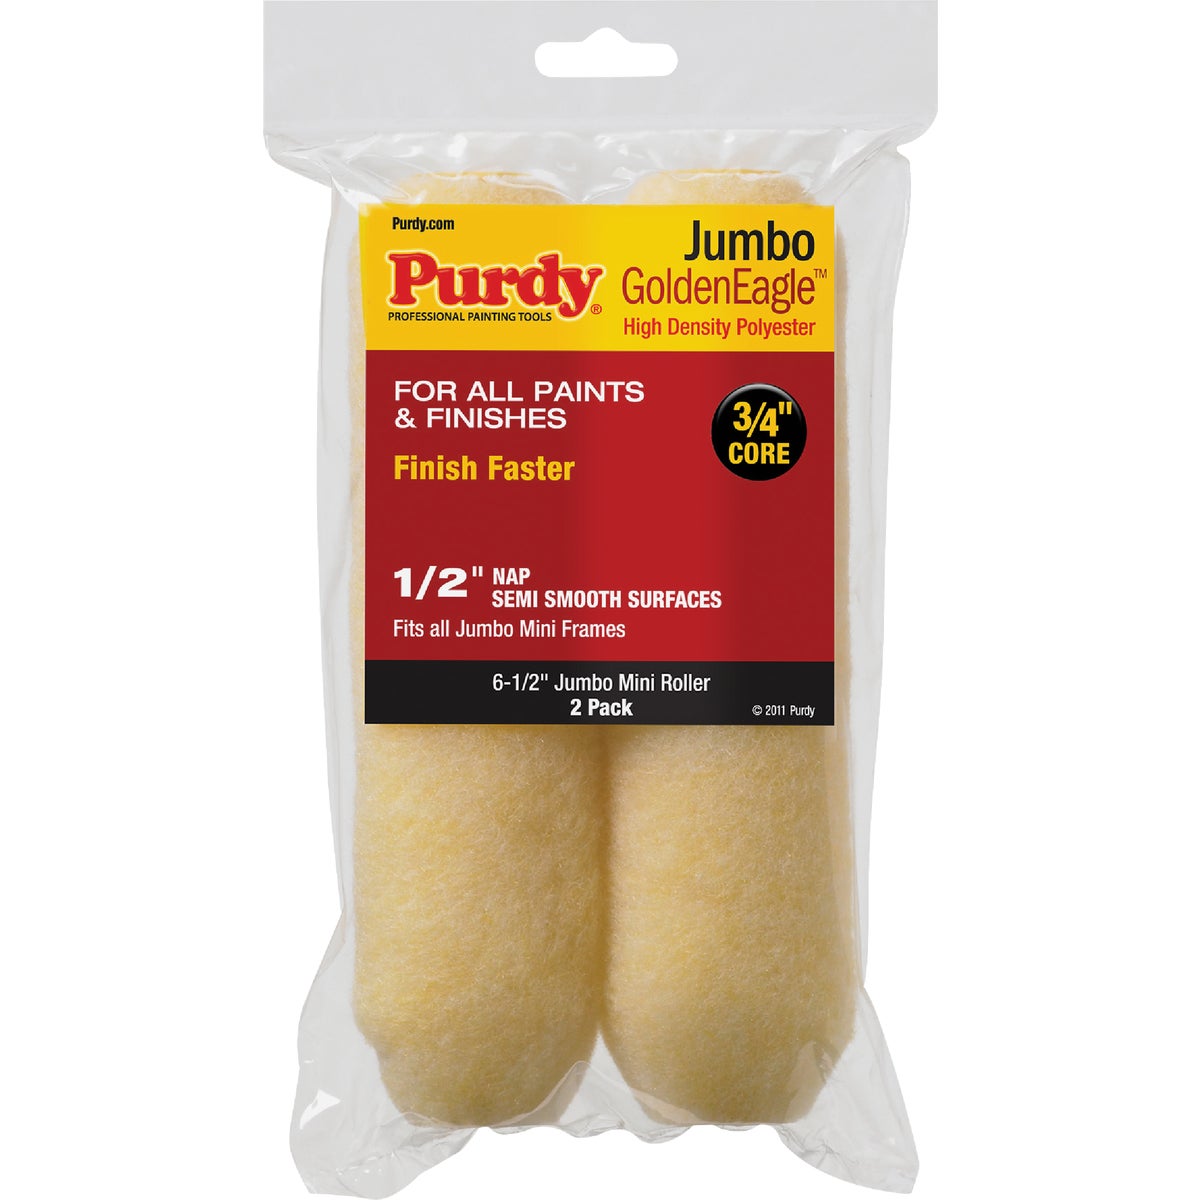 Purdy Jumbo Golden Eagle 6-1/2 In. x 1/2 In. Mini Knit Fabric Roller Cover (2-Pack)